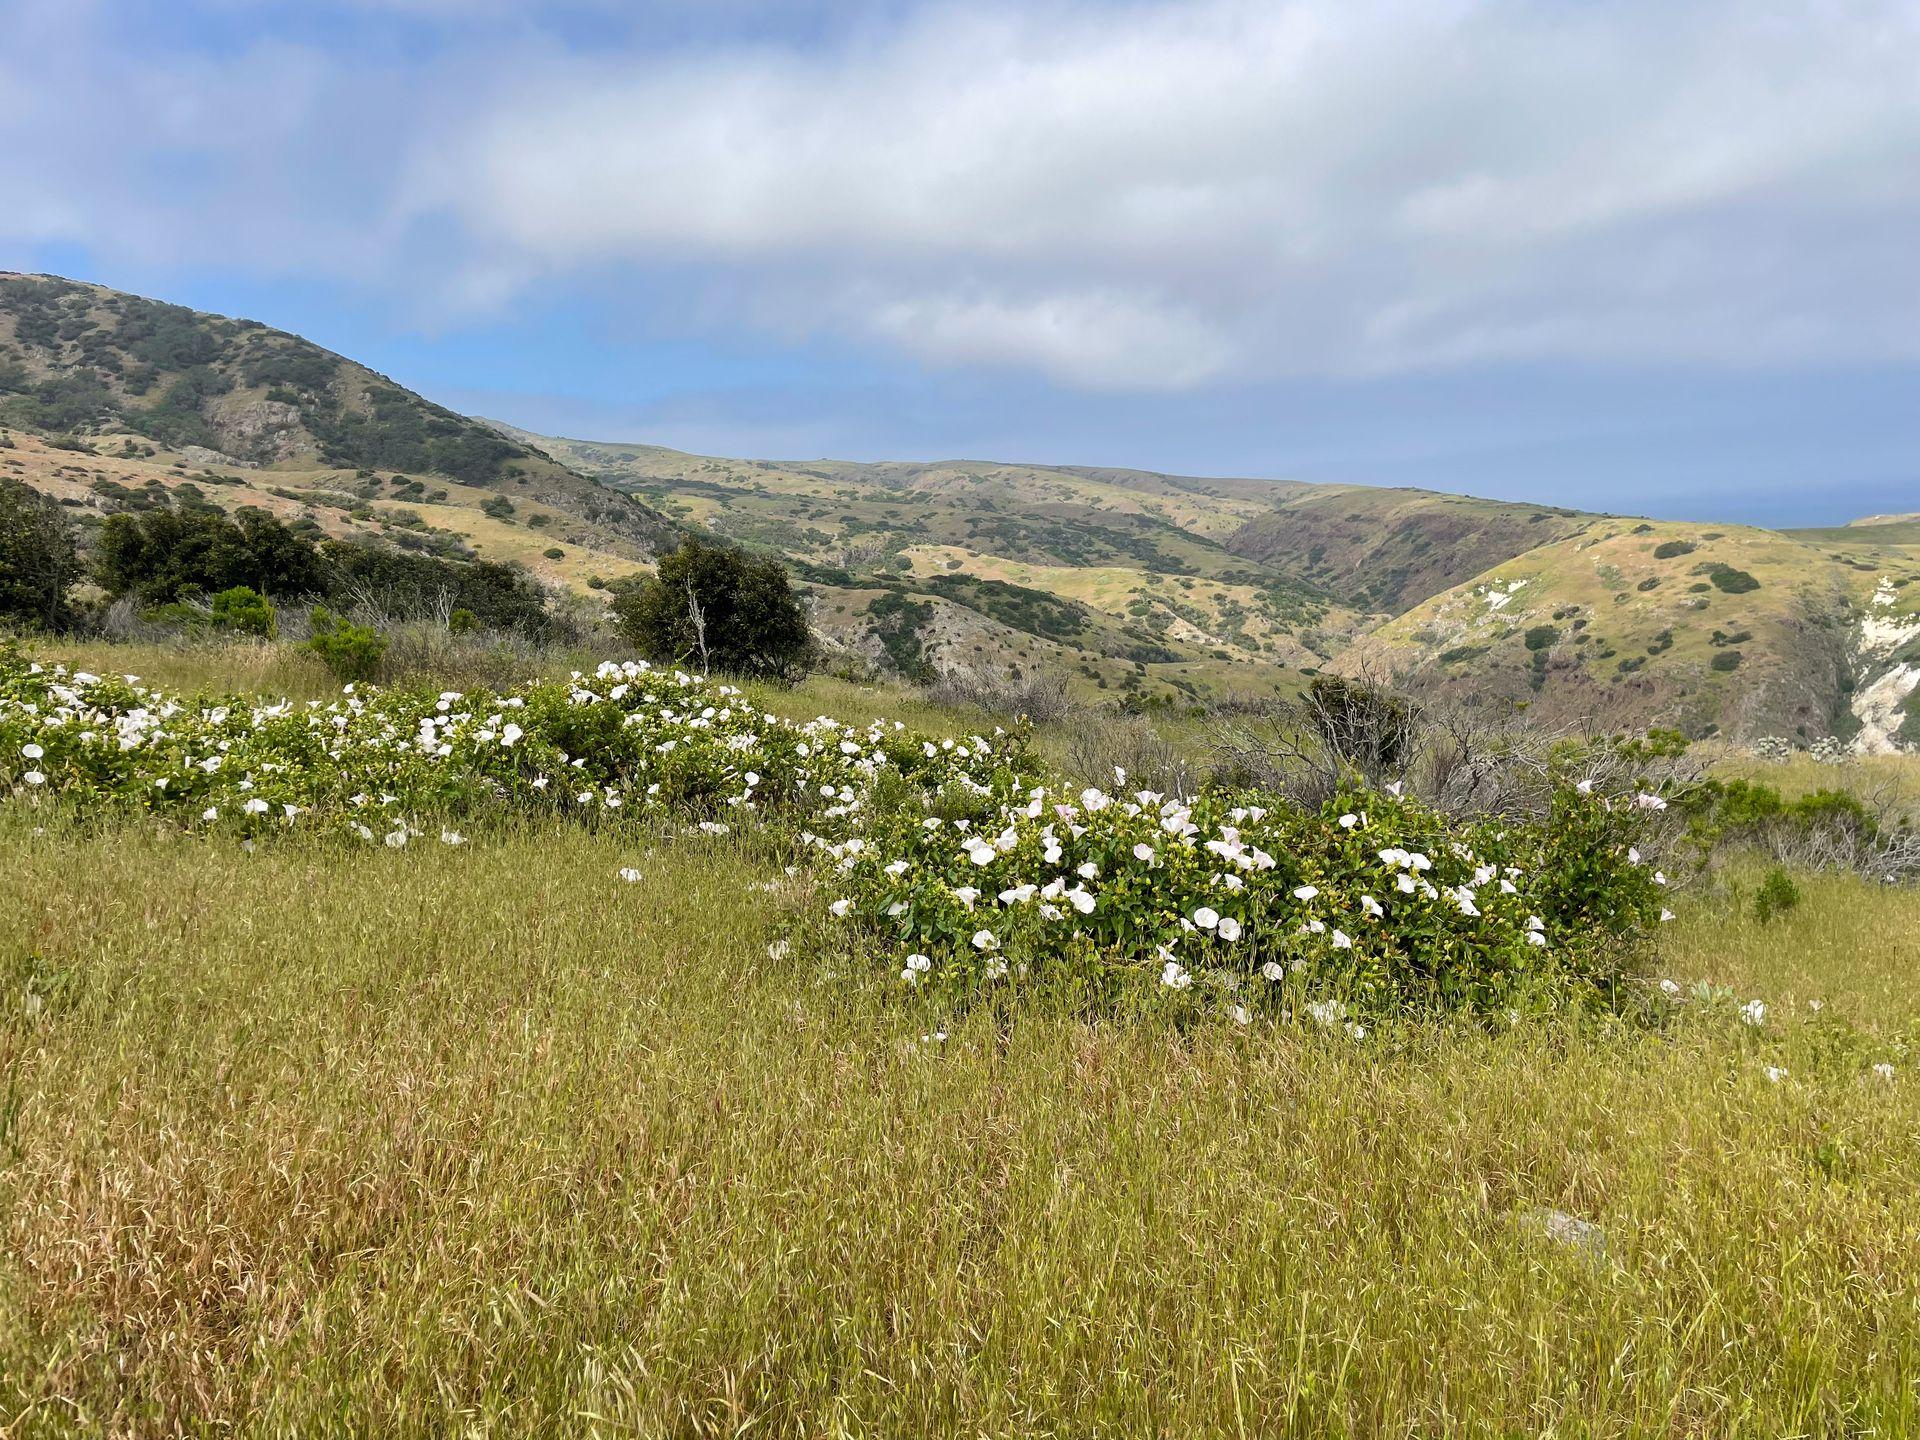 White flowers and green hills in the distance seen while hiking on Santa Cruz Island